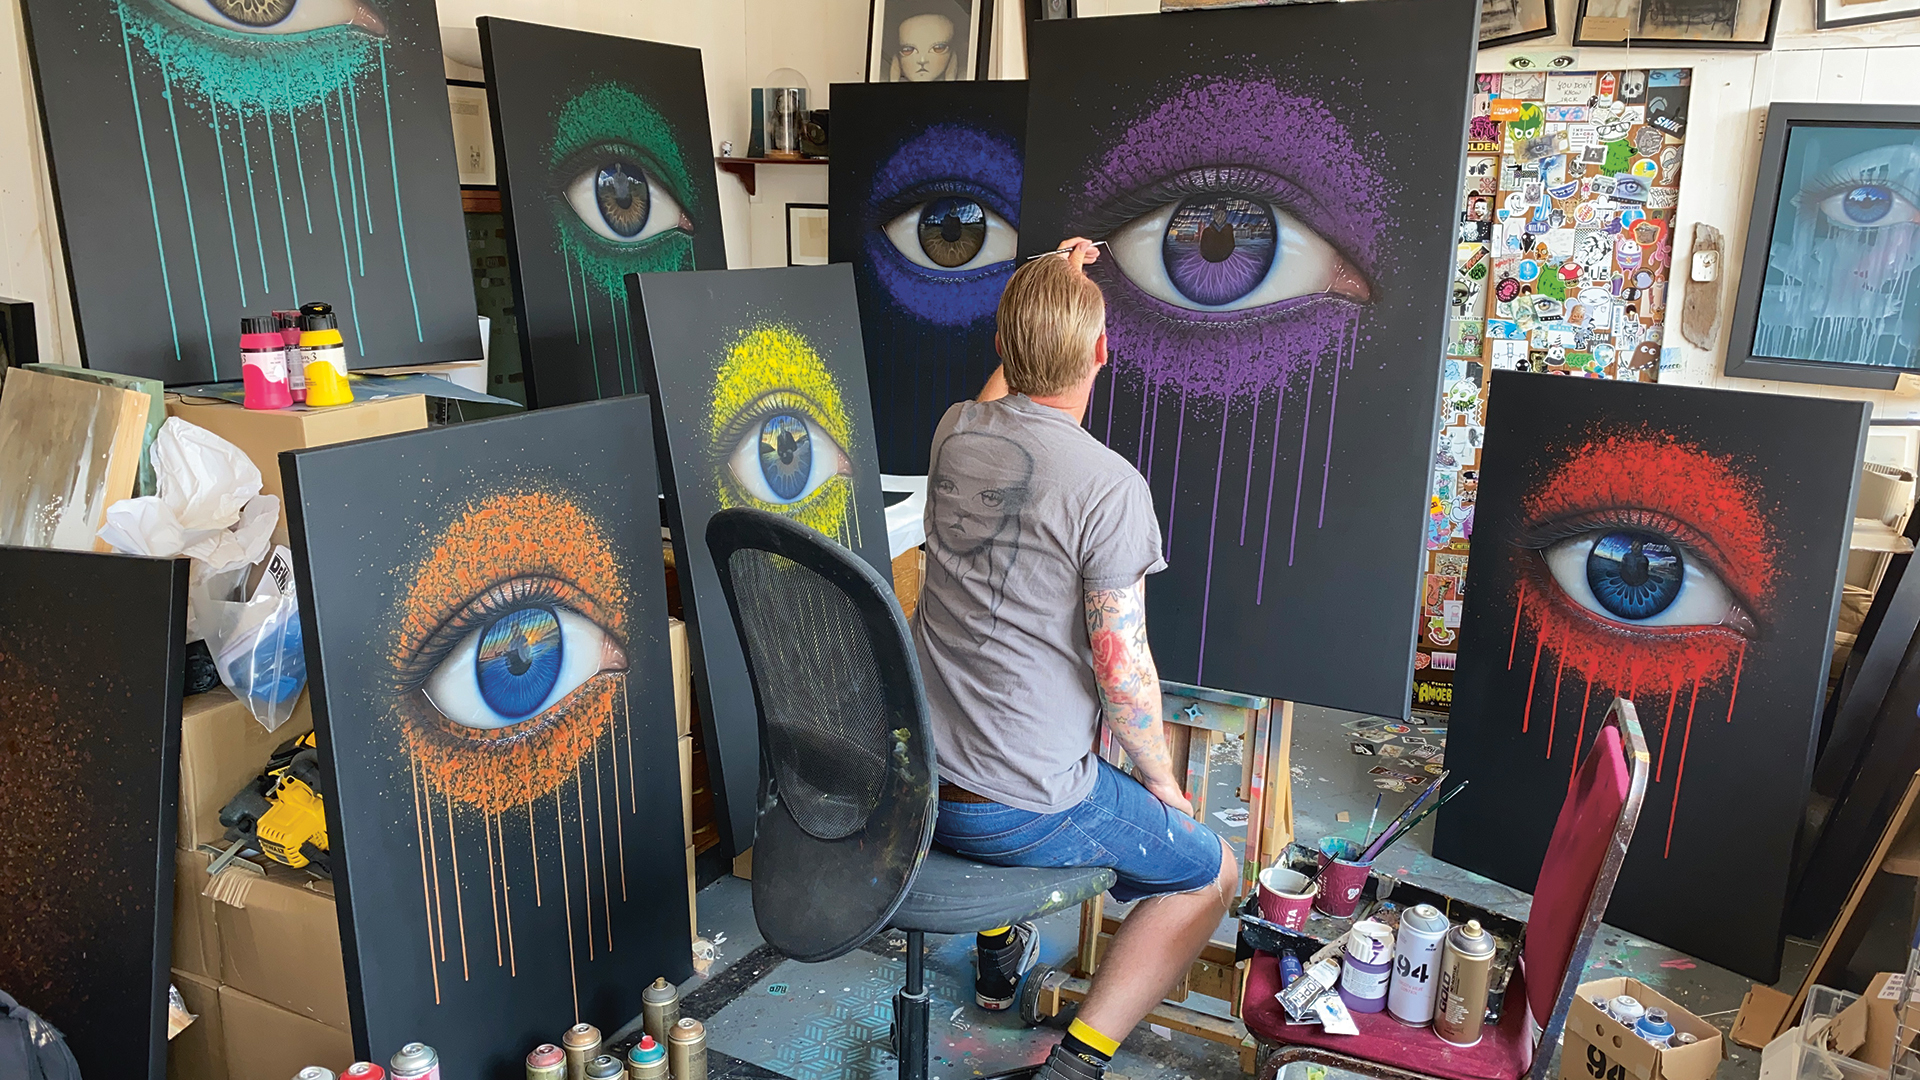 My Dog Sighs in the studio